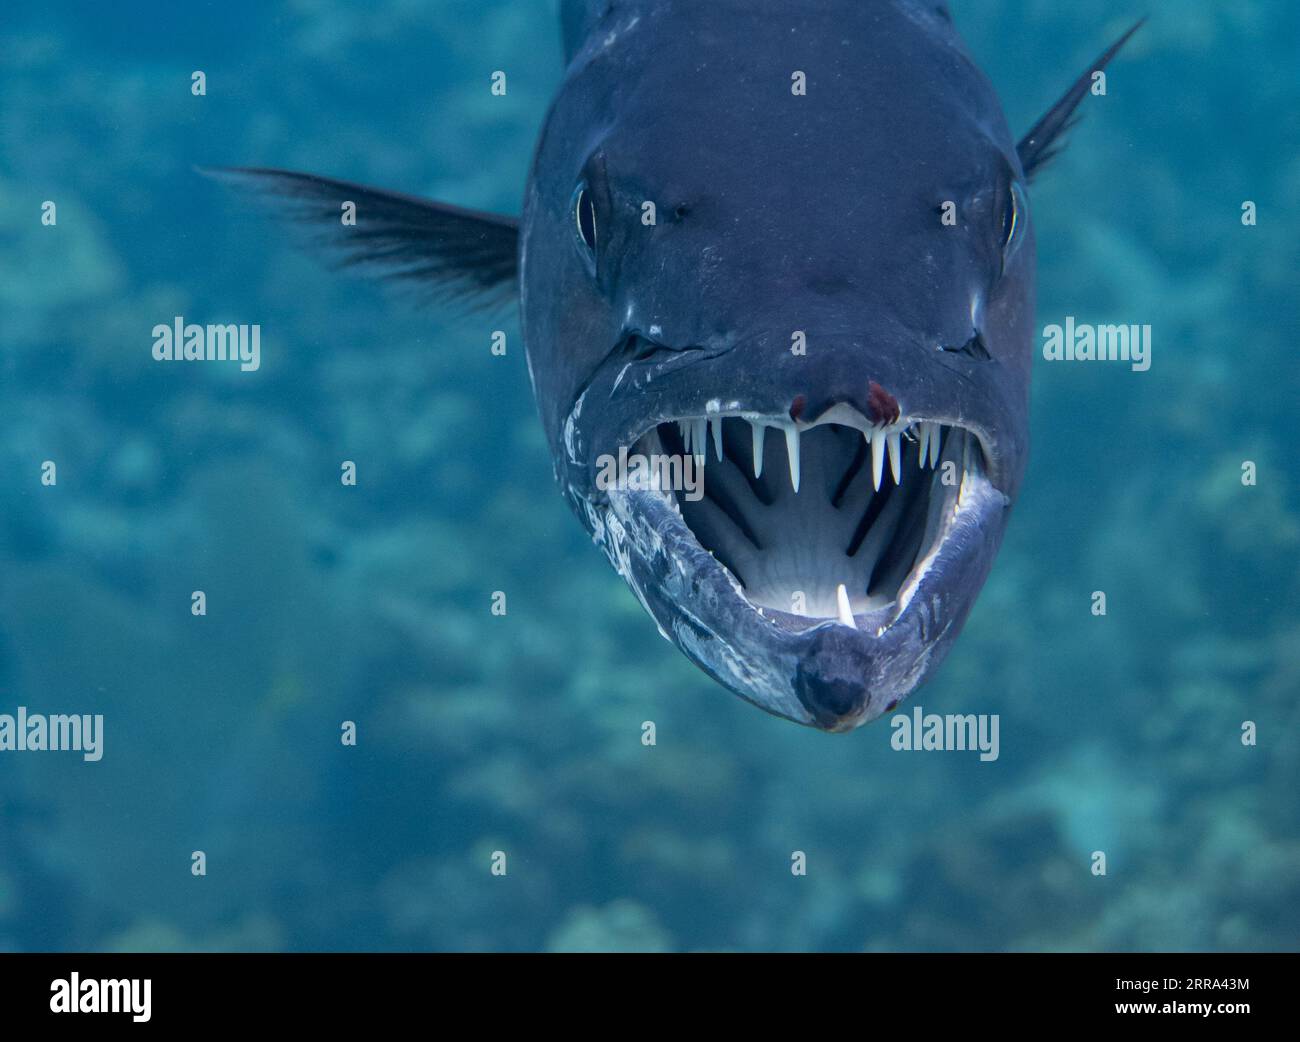 A barracuda (Sphyraena barracuda) patients waits while a Cayman cleaning goby (Elacatinus cayman) cleans its mouth and teeth. Stock Photo